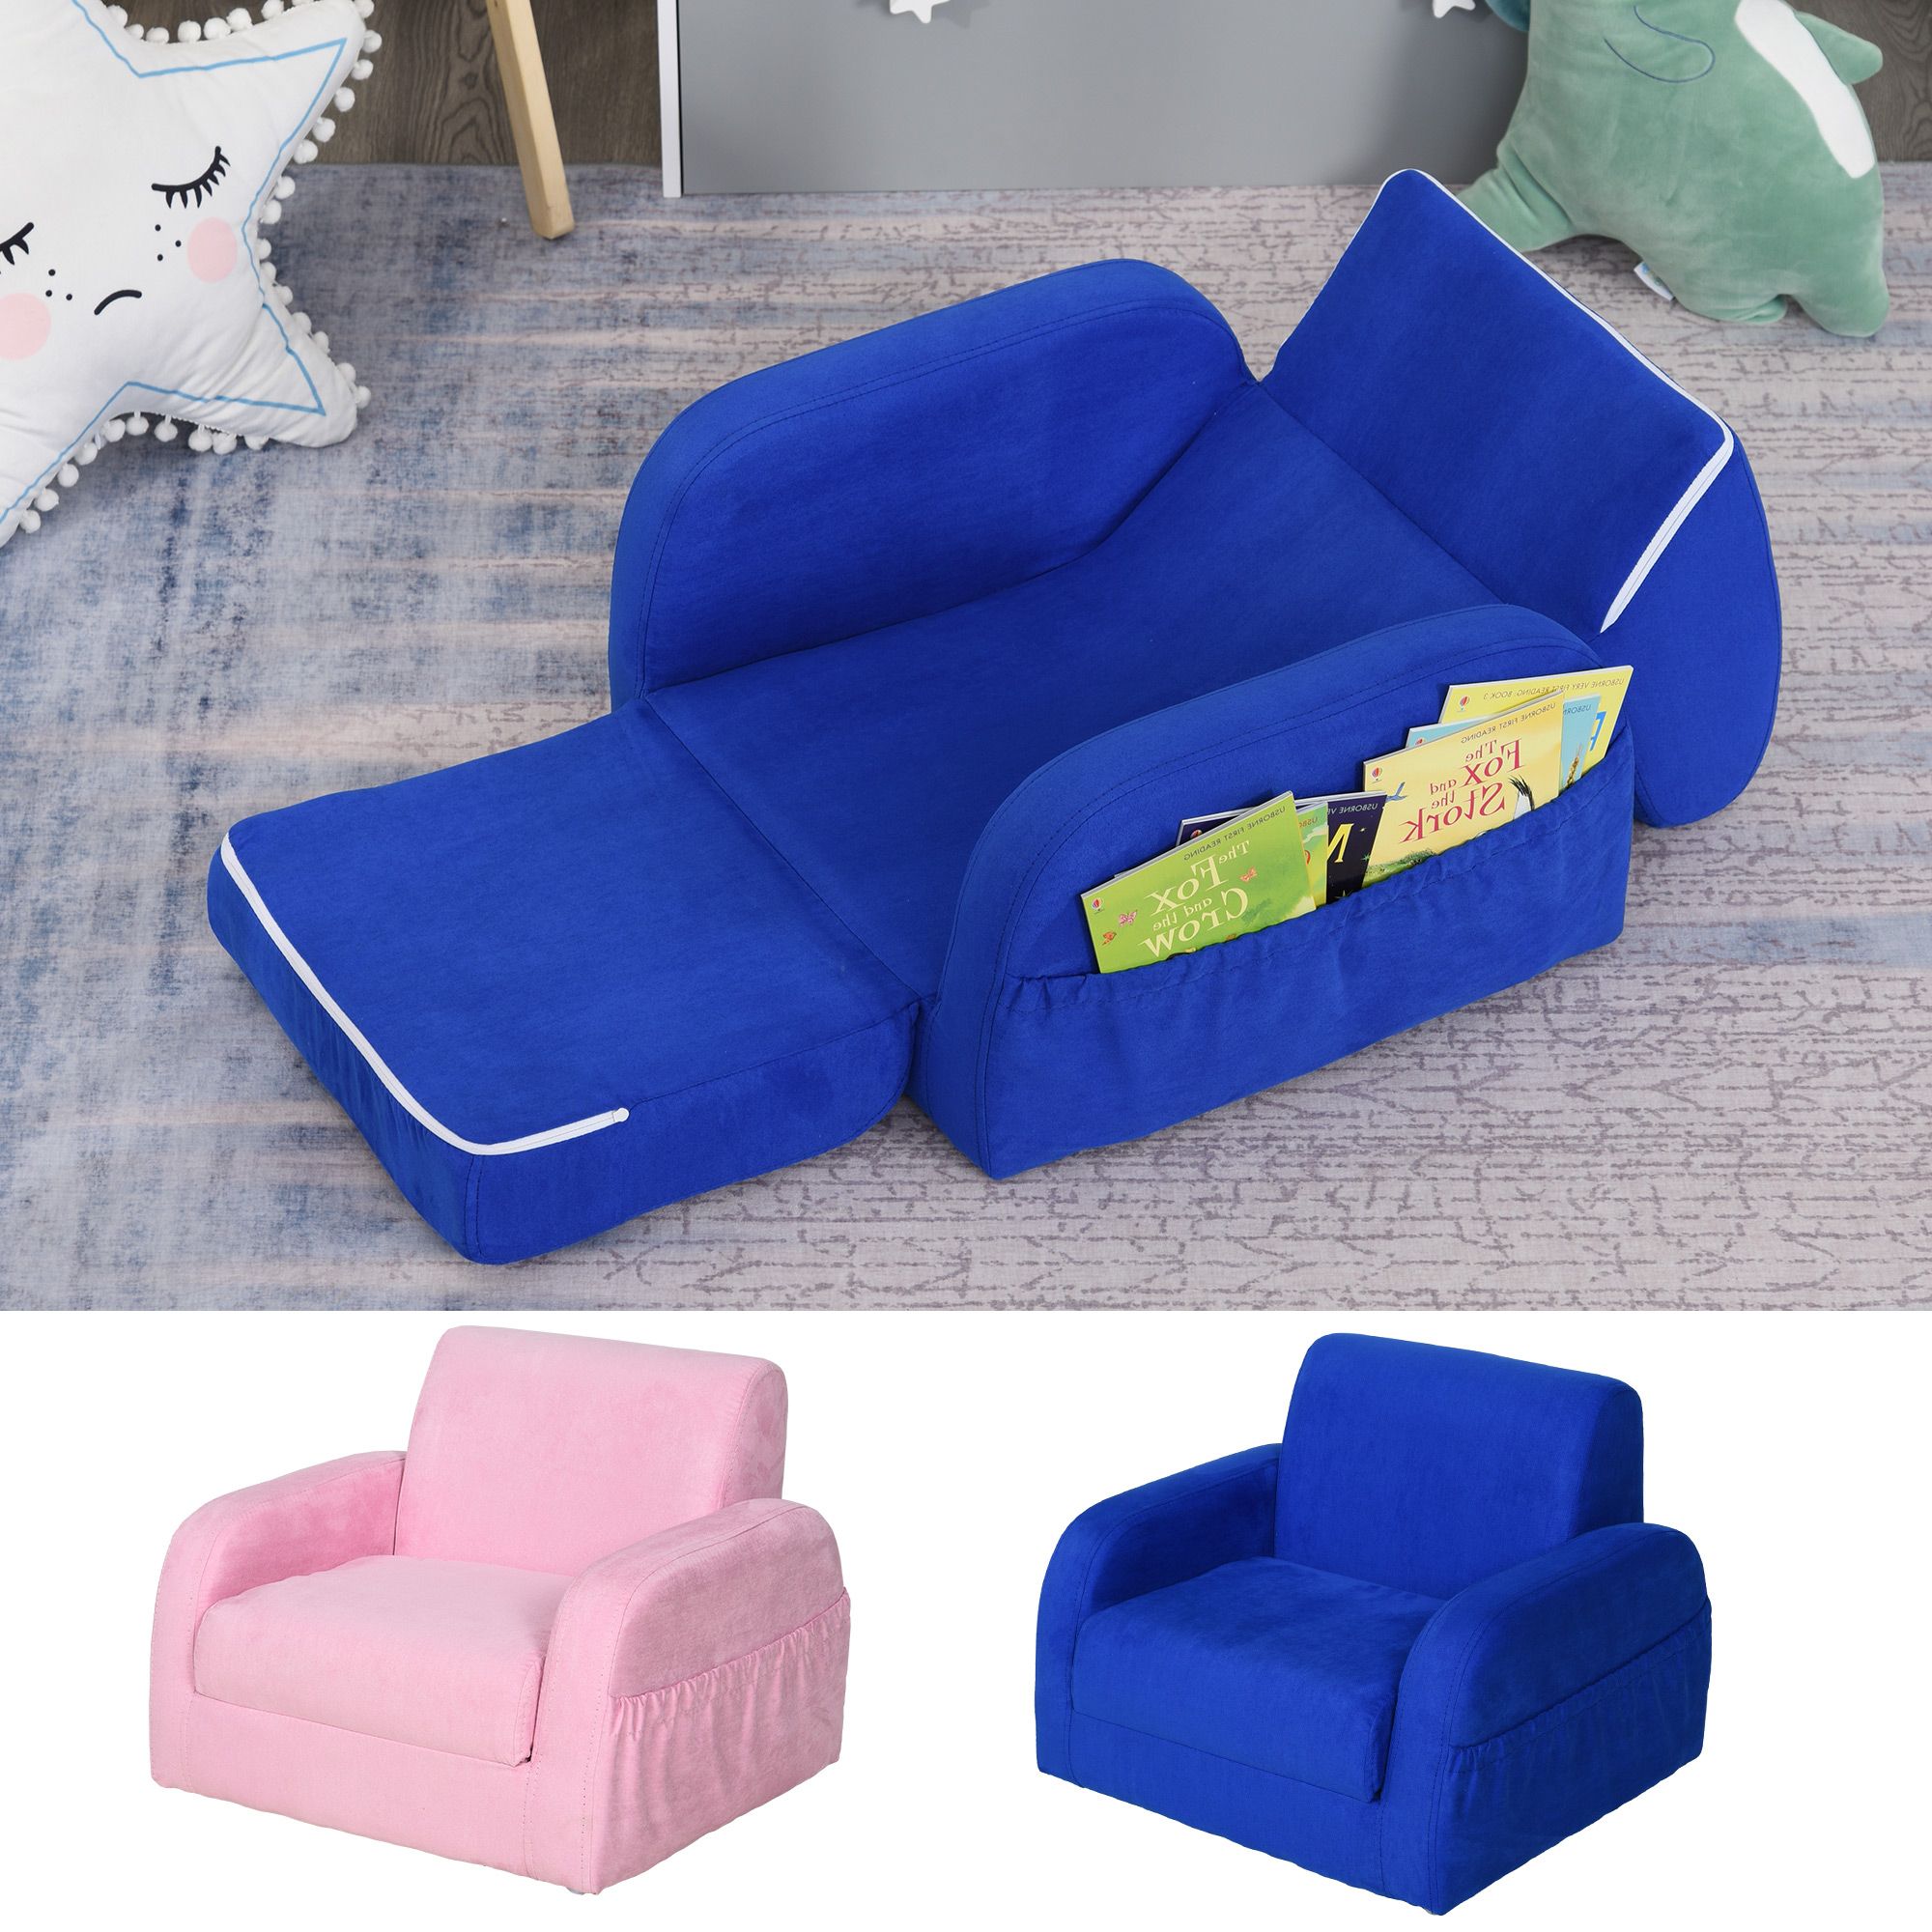 2 In 1 Foldable Children's Sofa Beds In Well Known 2 In 1 Kids Sofa Armchair Chair Fold Out Flip Open Baby Bed Couch (View 2 of 15)